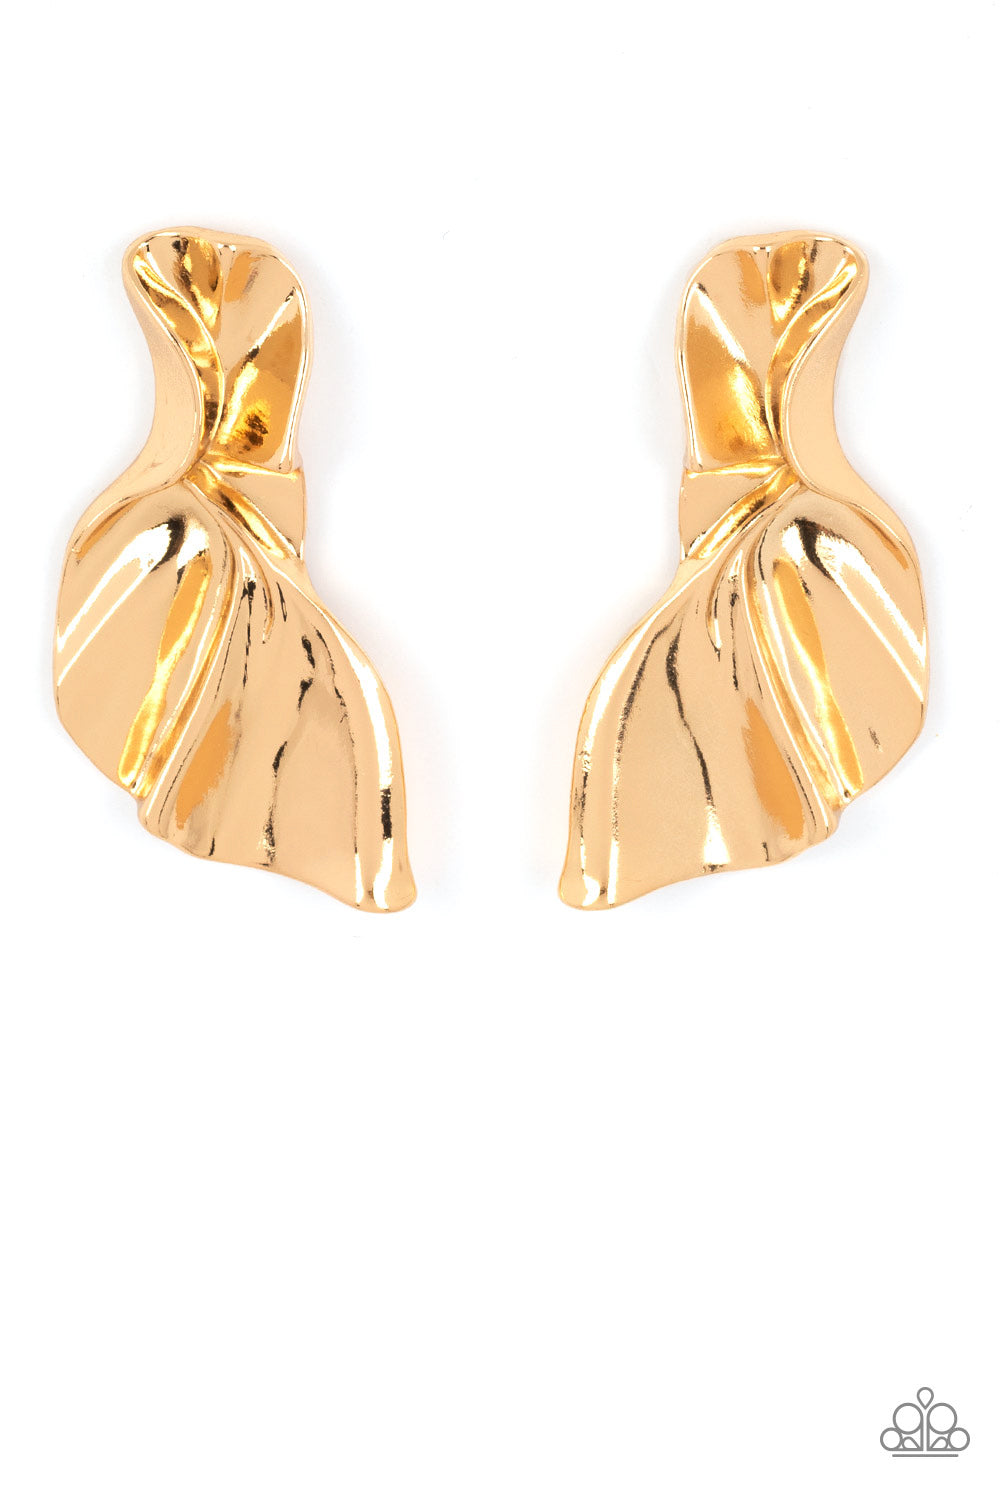 METAL-Physical Mood - Gold Post Earring